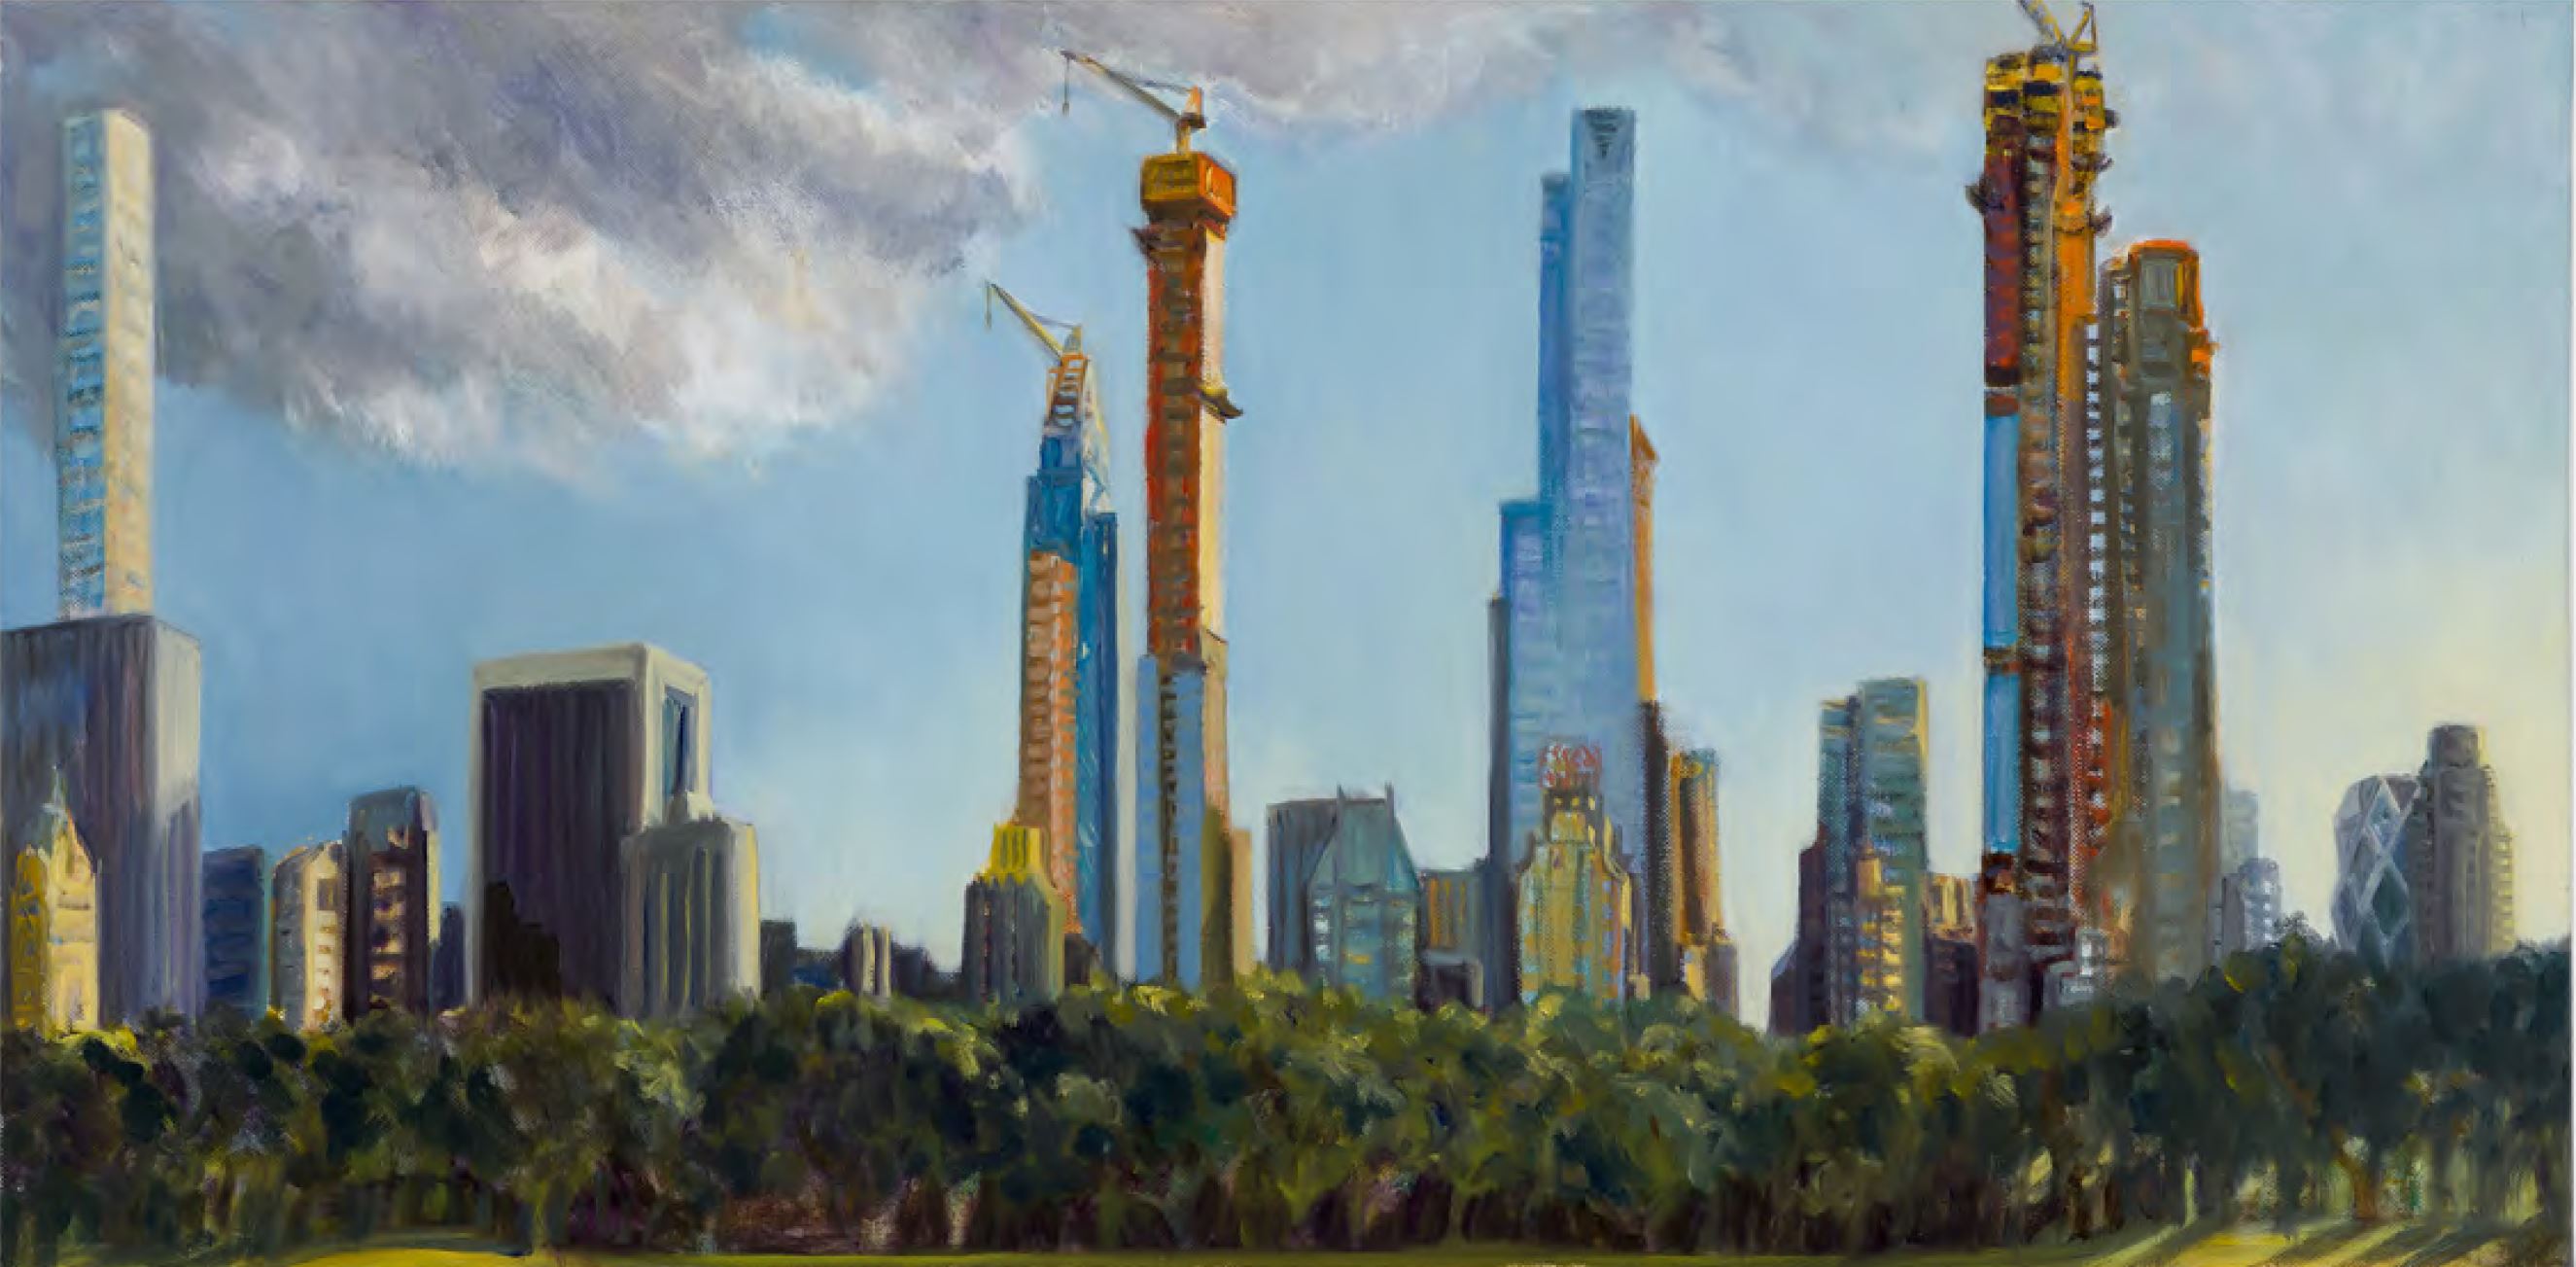 Looking South from Sheep Meadow, August 2018, Oil on canvas, 15”x 30”